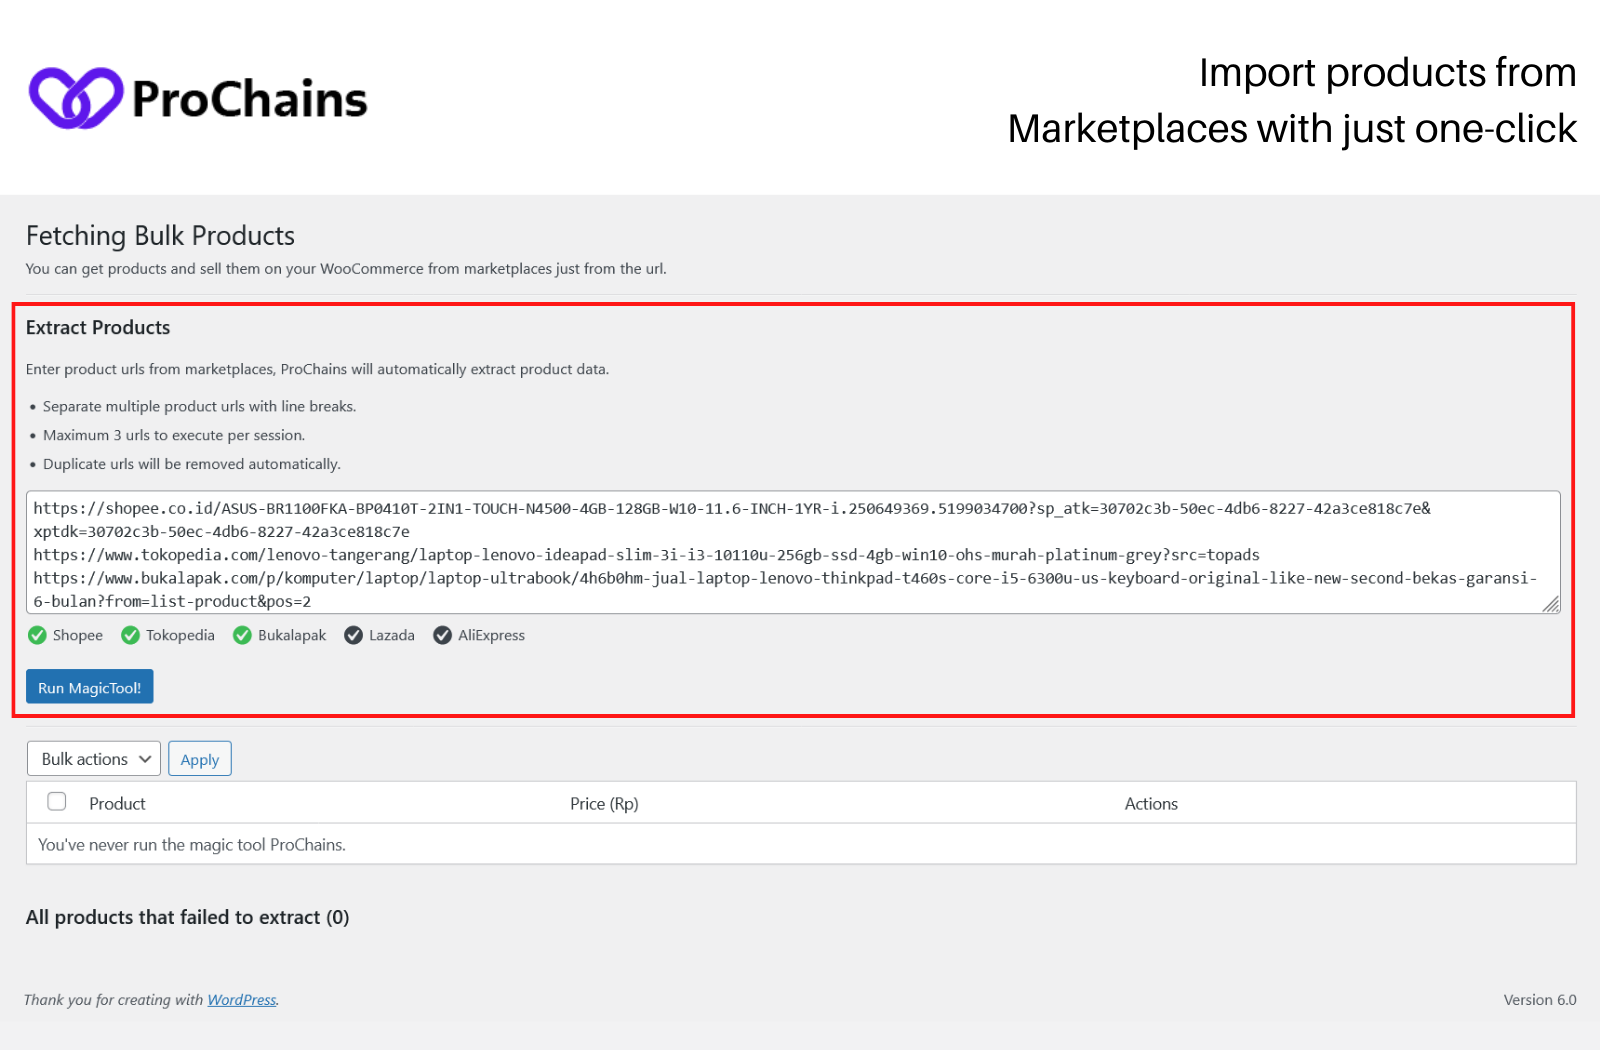 Import products from Marketplaces with just one-click.